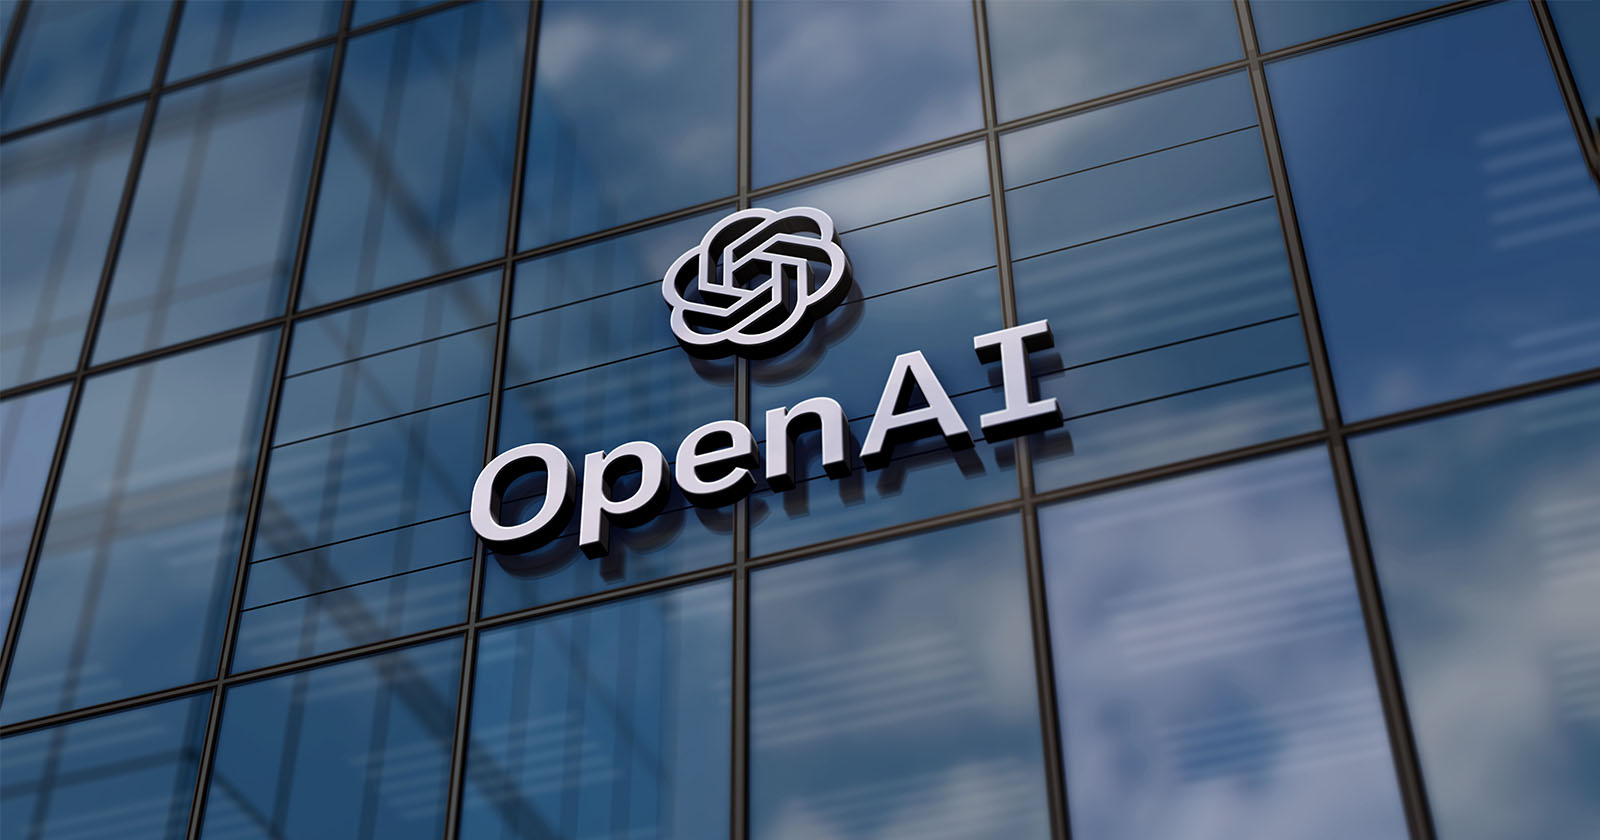 A 3d-rendered image of the openai logo, which consists of interlocking circles and letters, mounted on the exterior of a modern glass building under a clear blue sky.